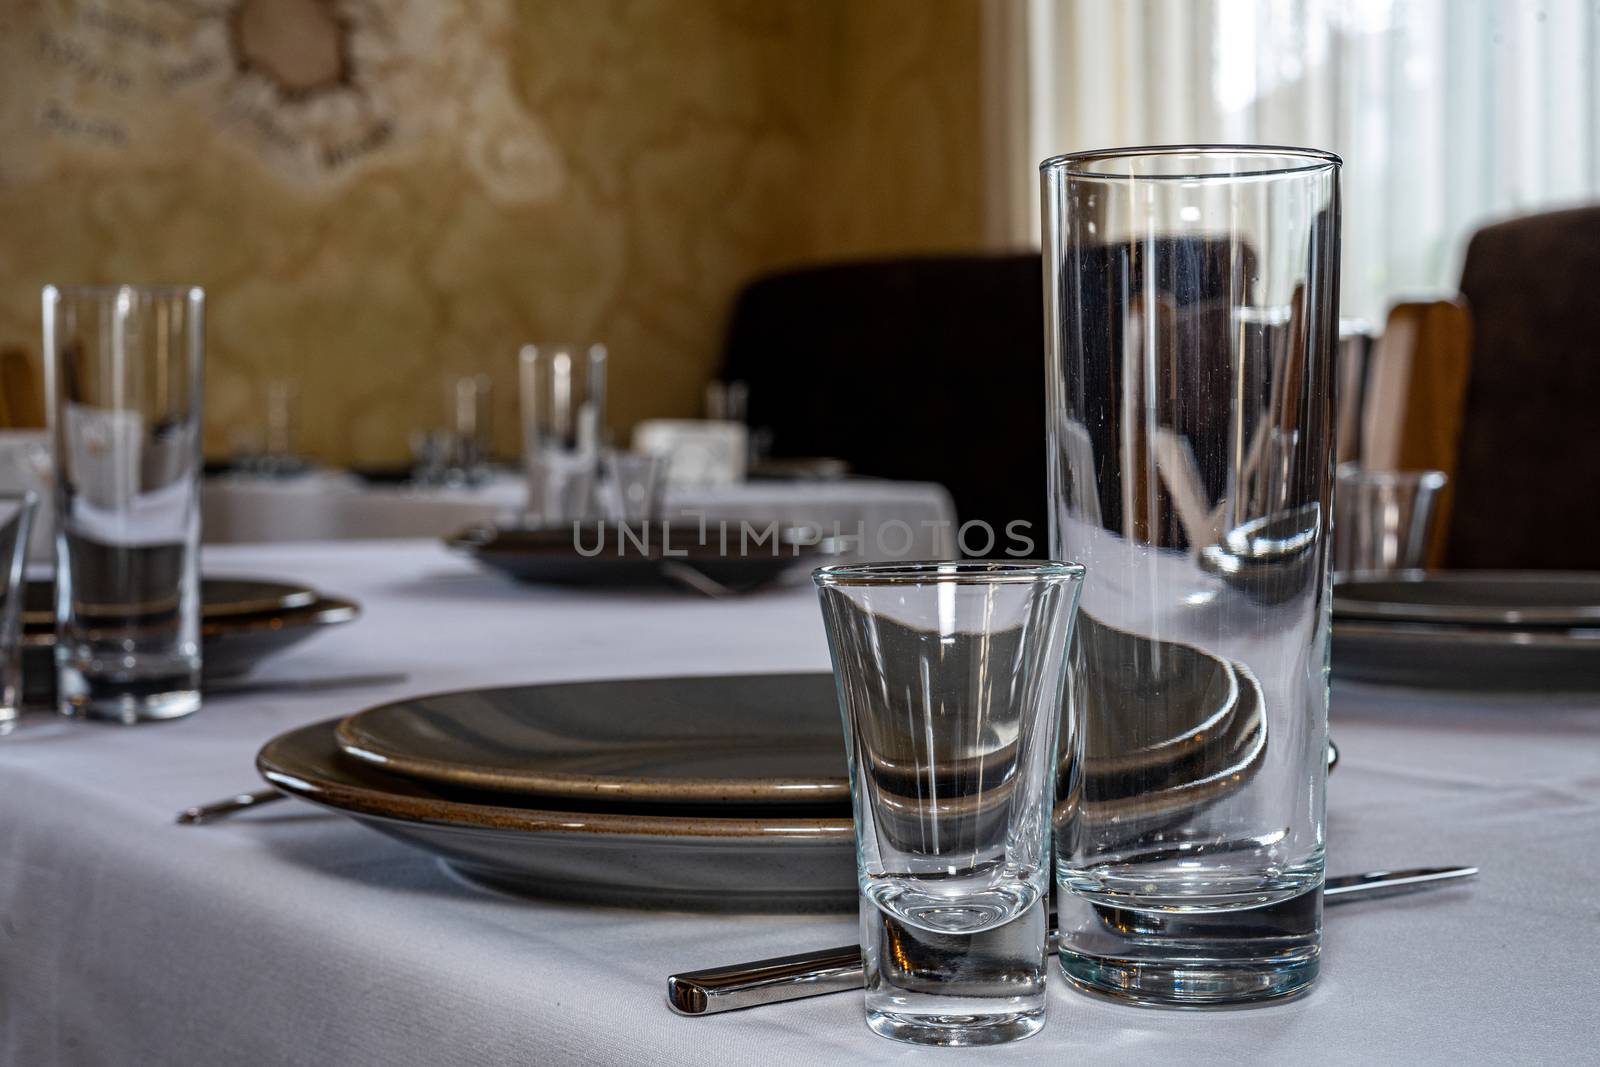 Table setting. Cutlery. Glass, stack, bowls and fork on the table.